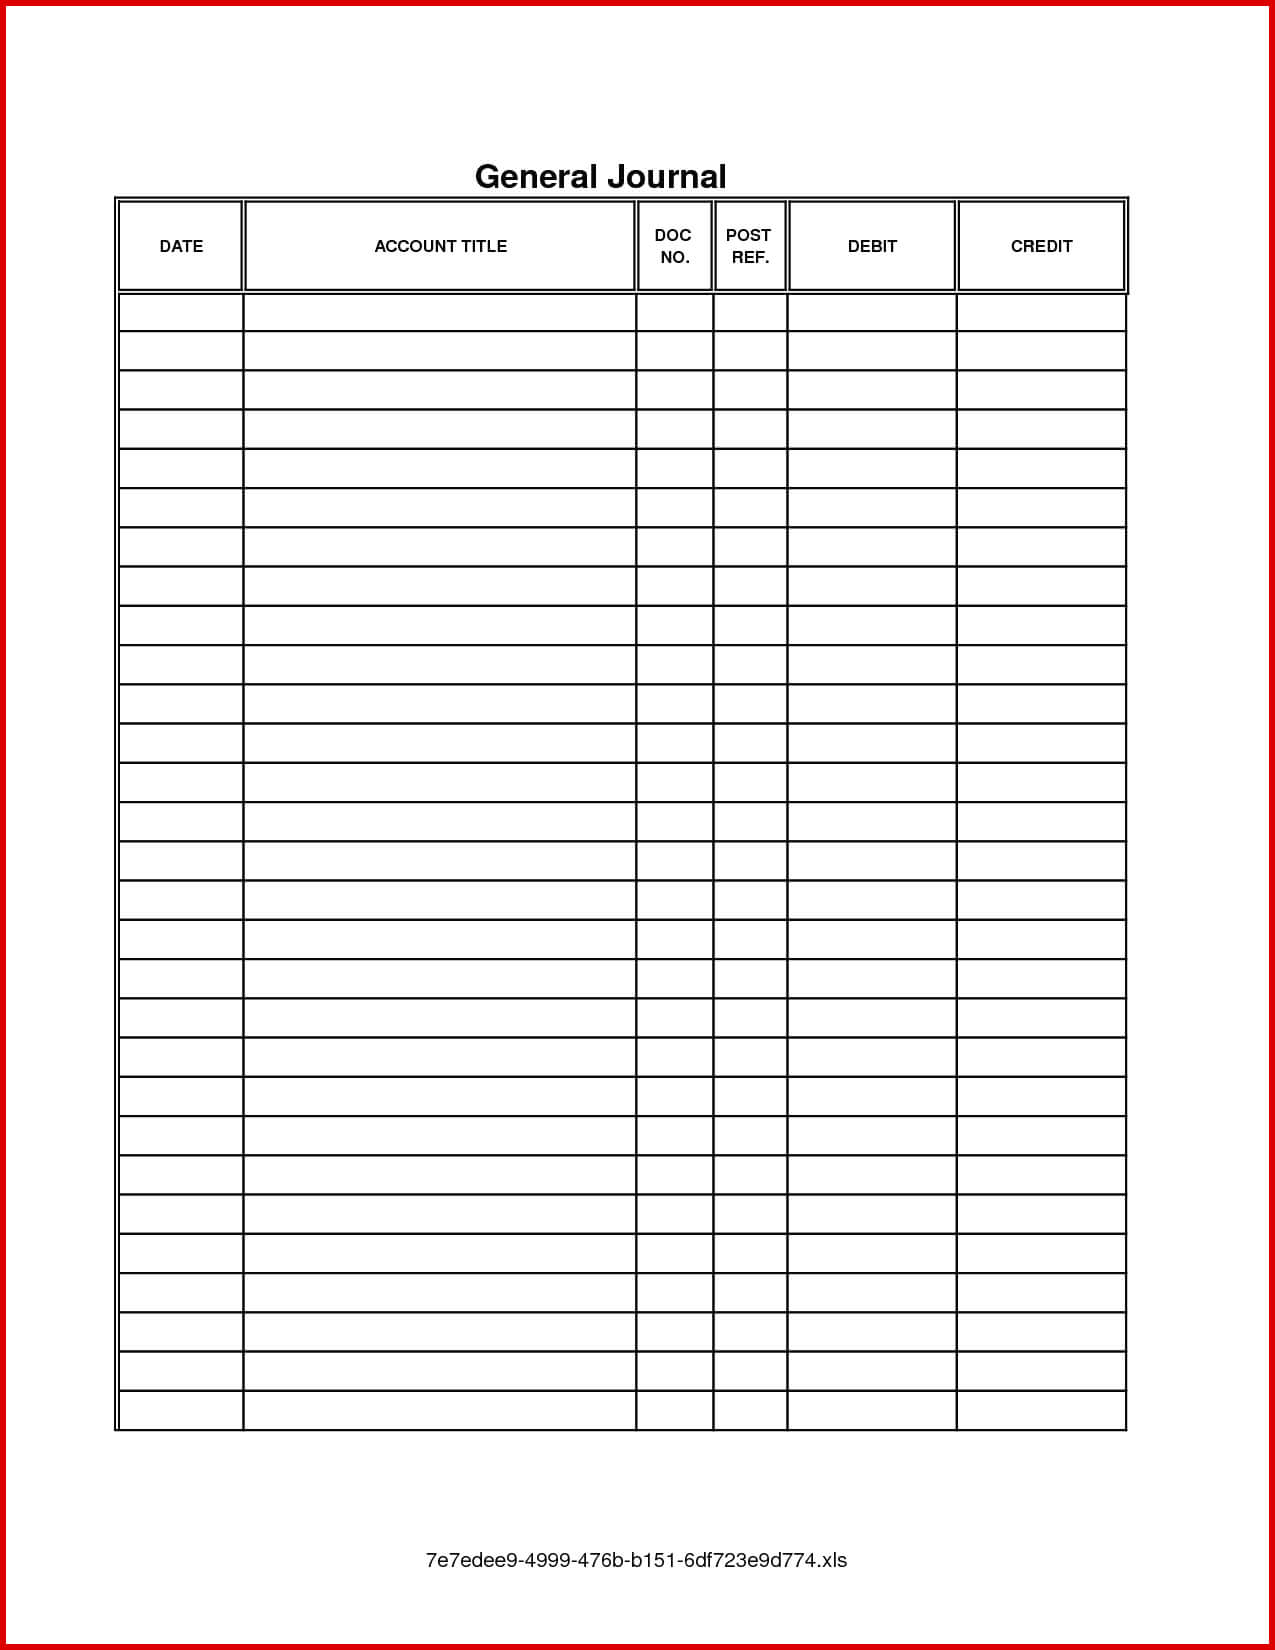 037 Contest Entry Form Template Word Download Ideas Pertaining To Double Entry Journal Template For Word